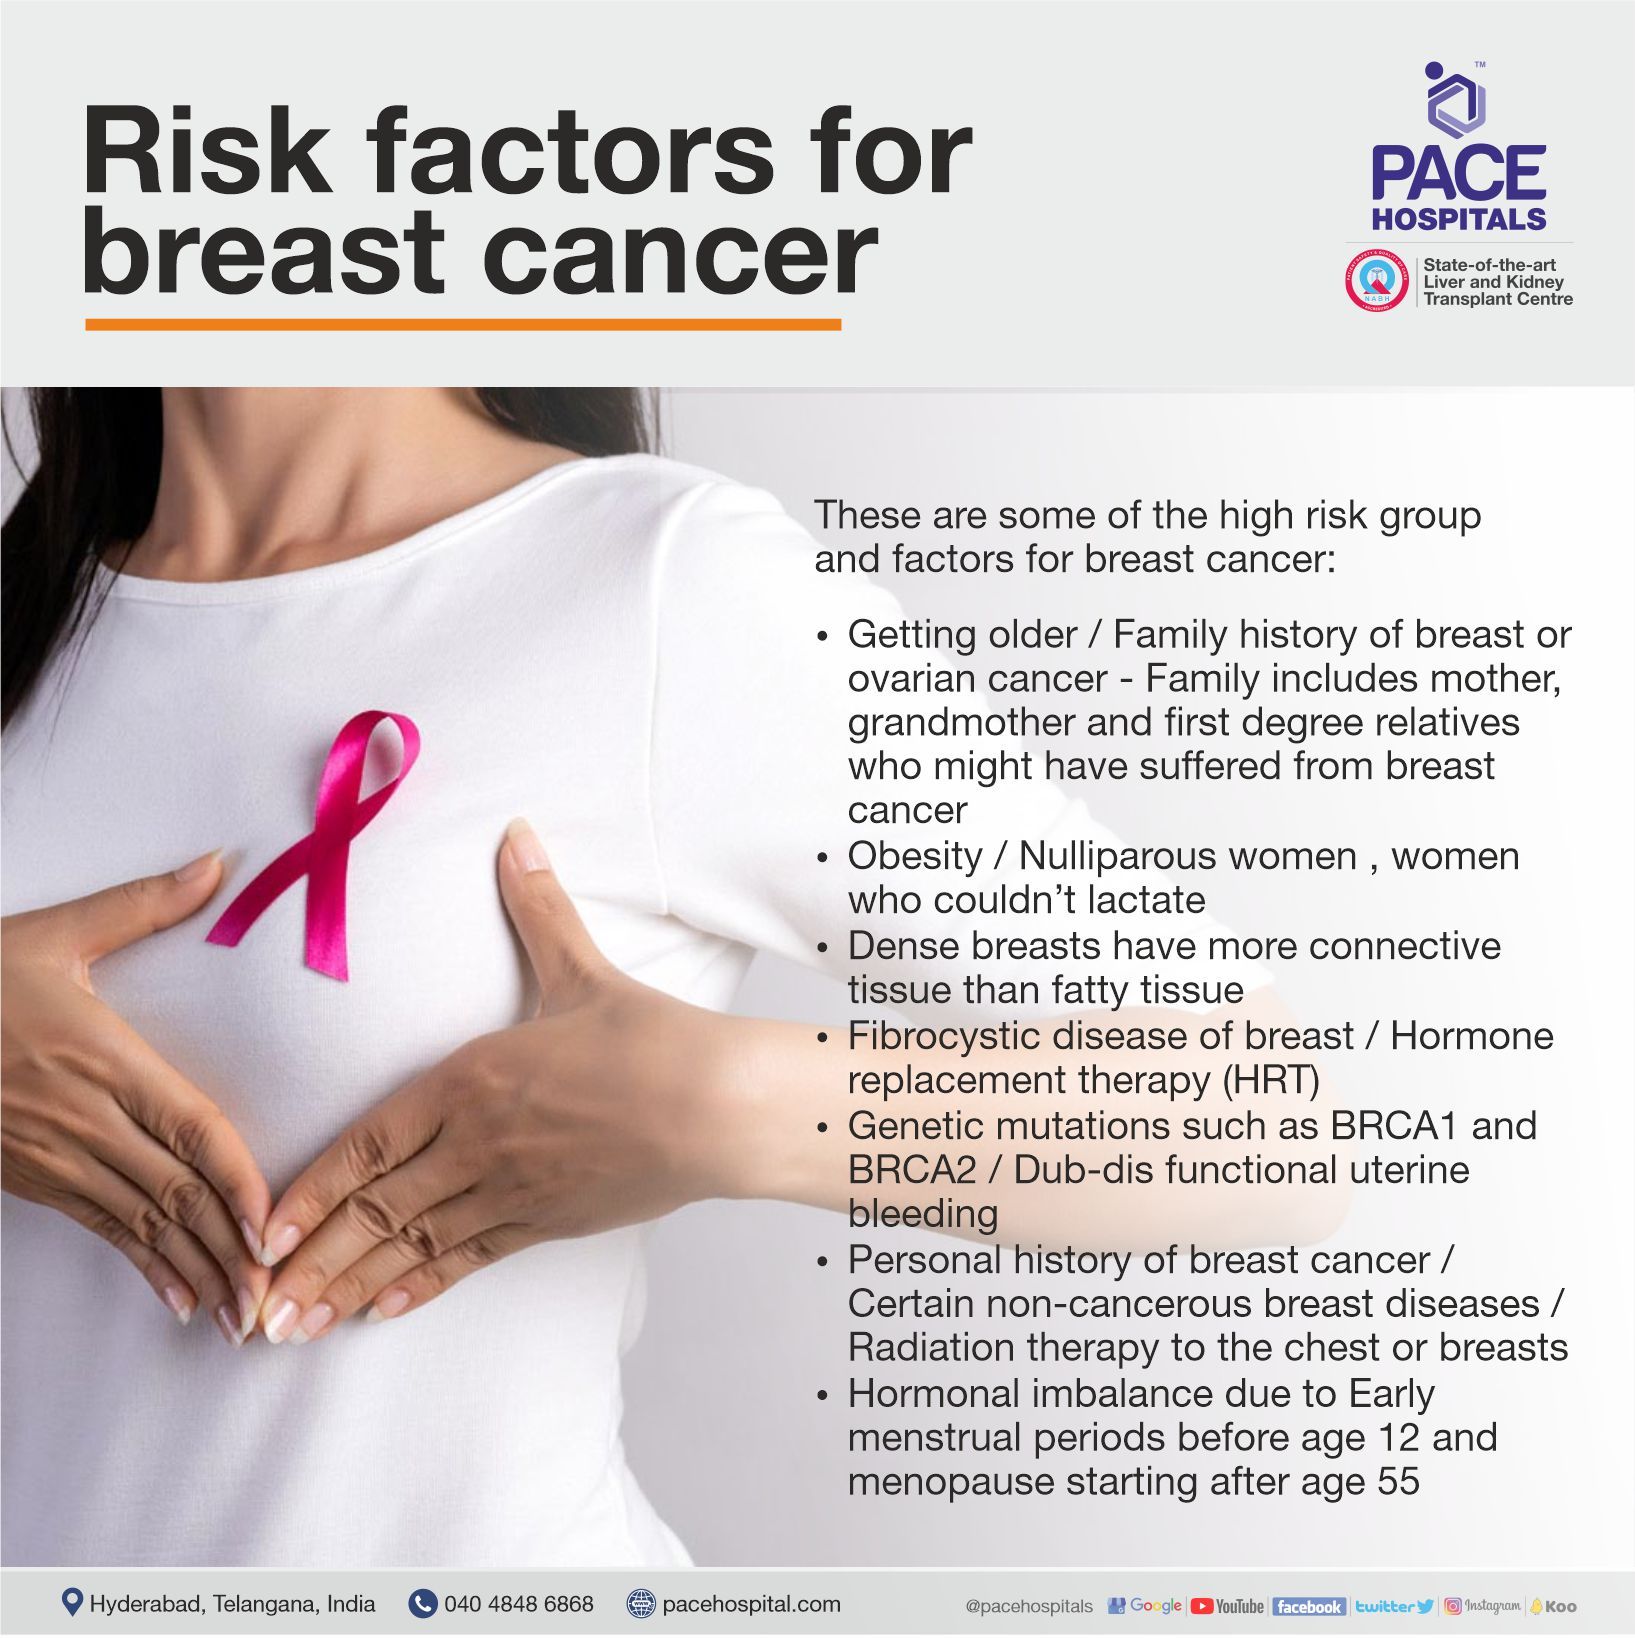 Breast Cancer Symptoms Signs Types Risk Factors And Prevention